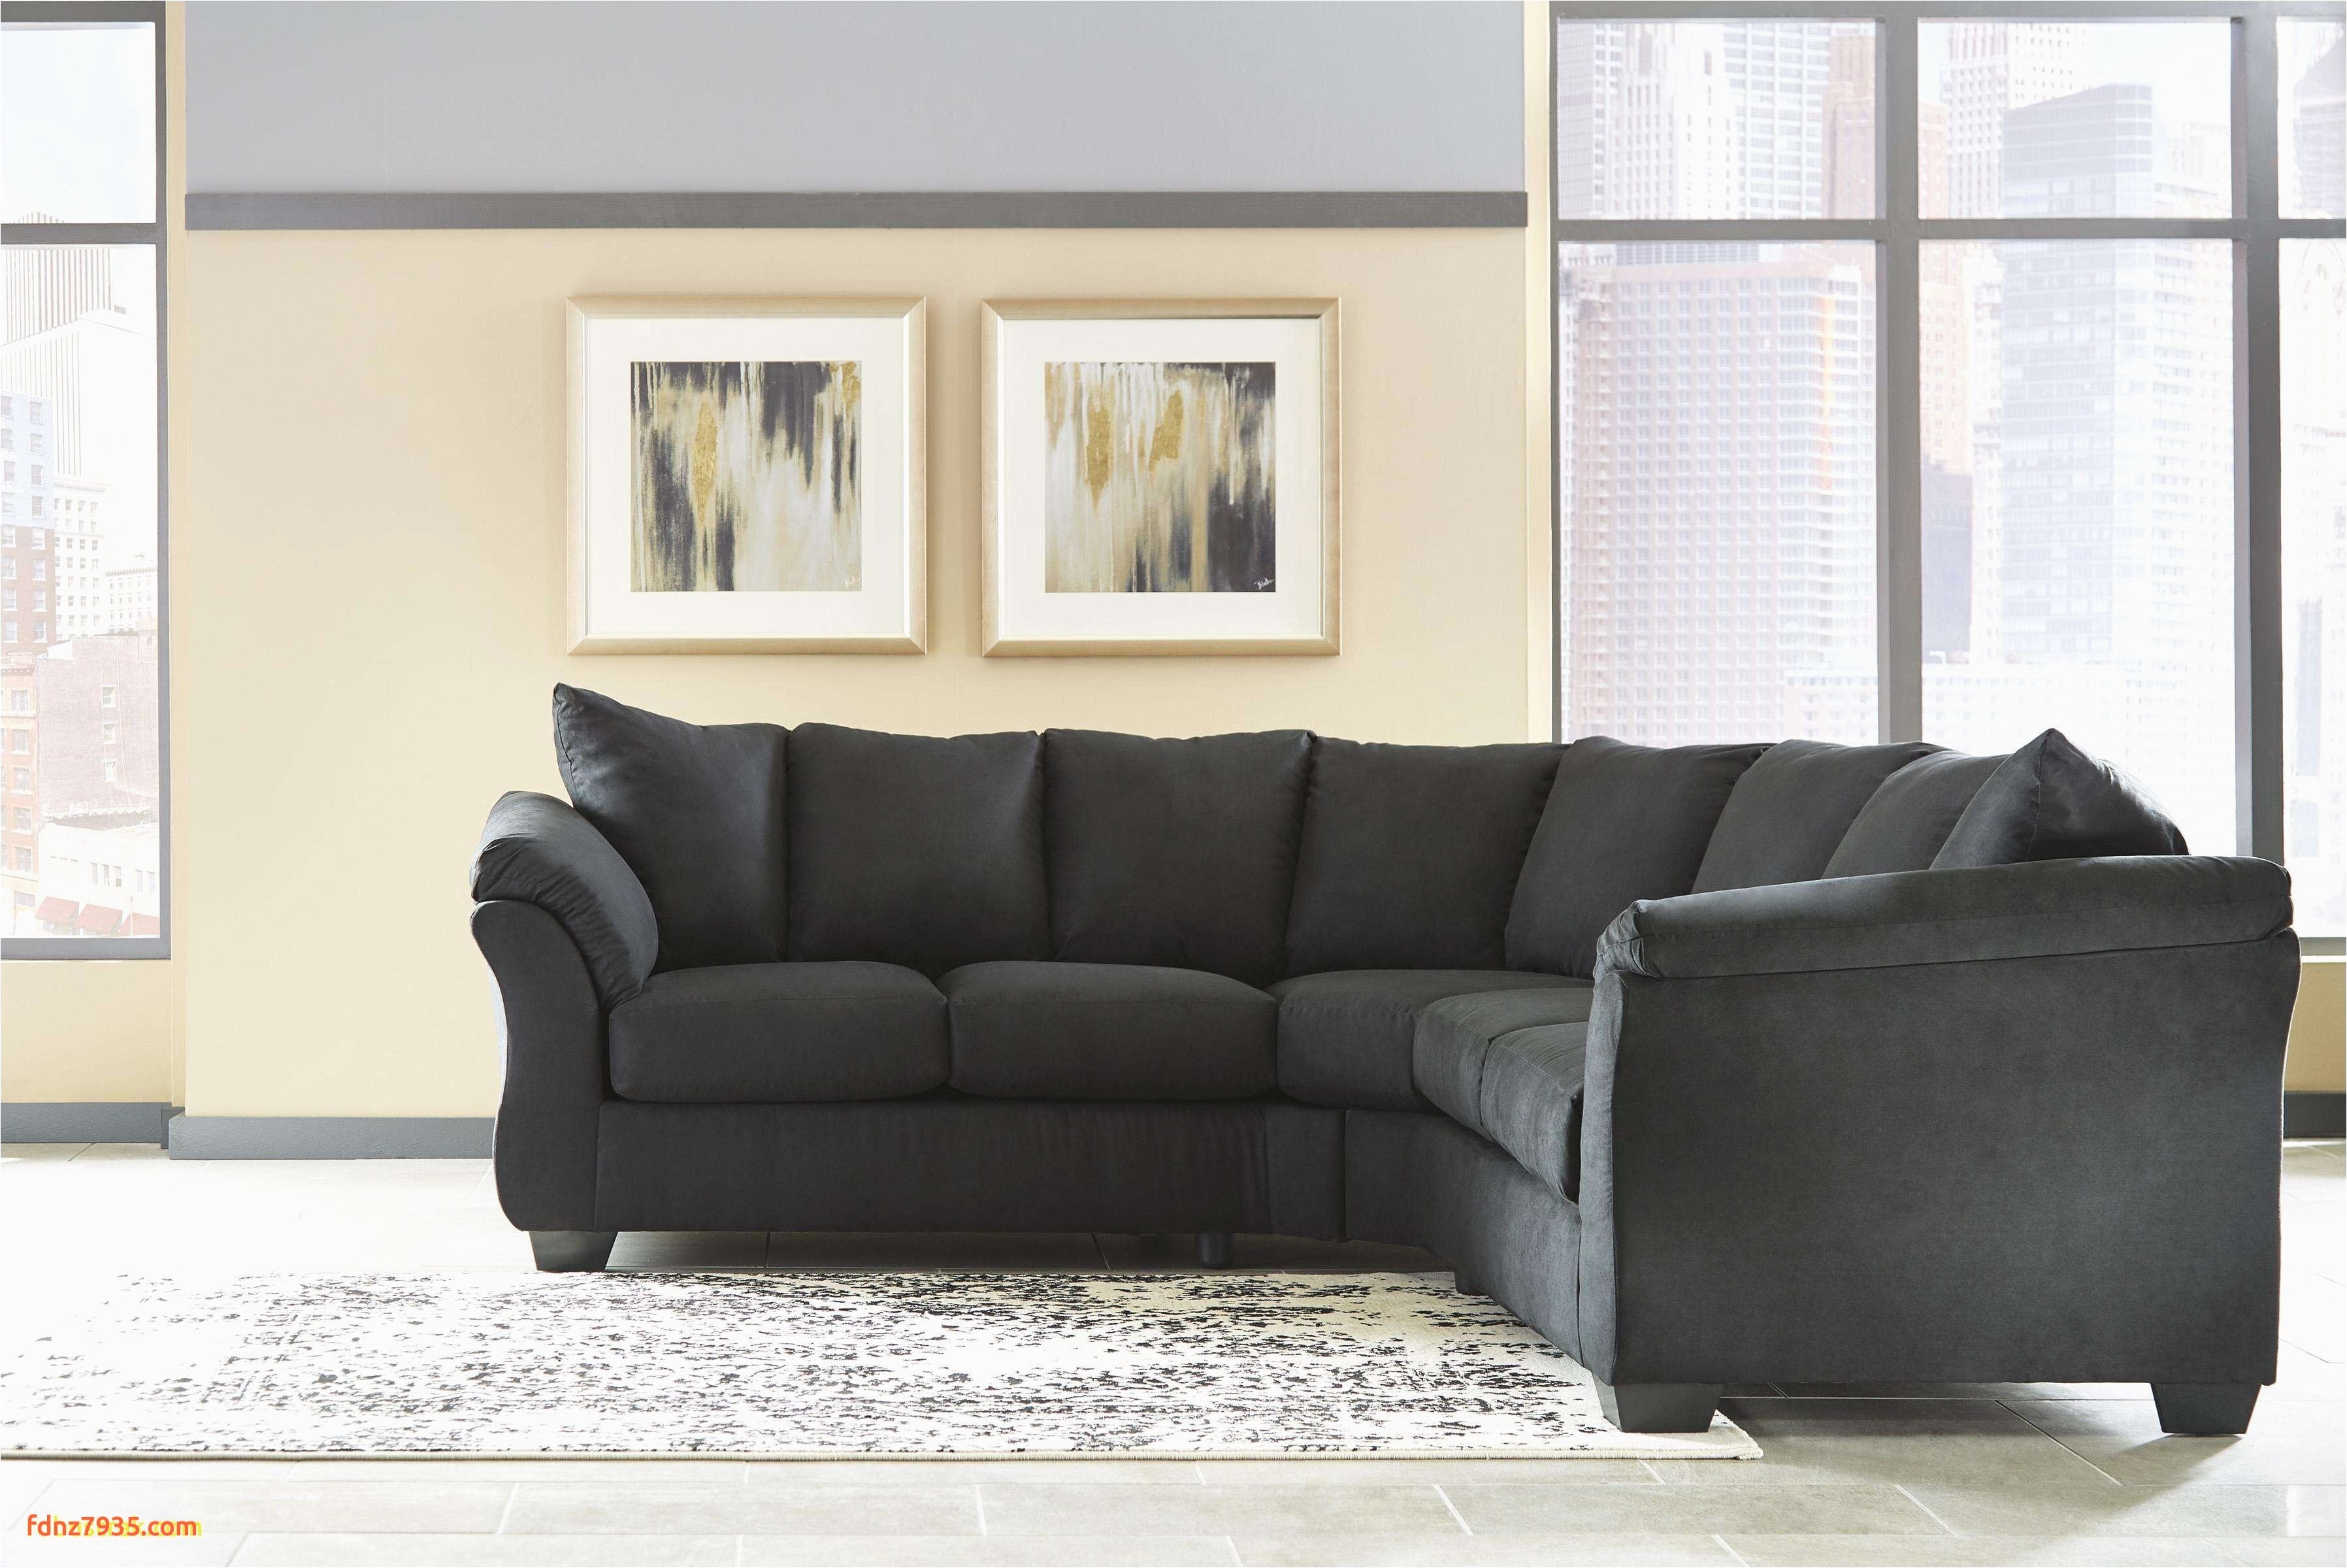 living room ideas with sectional sofas luxury sectional couch 0d tags fabulous new sectional couch magnificent